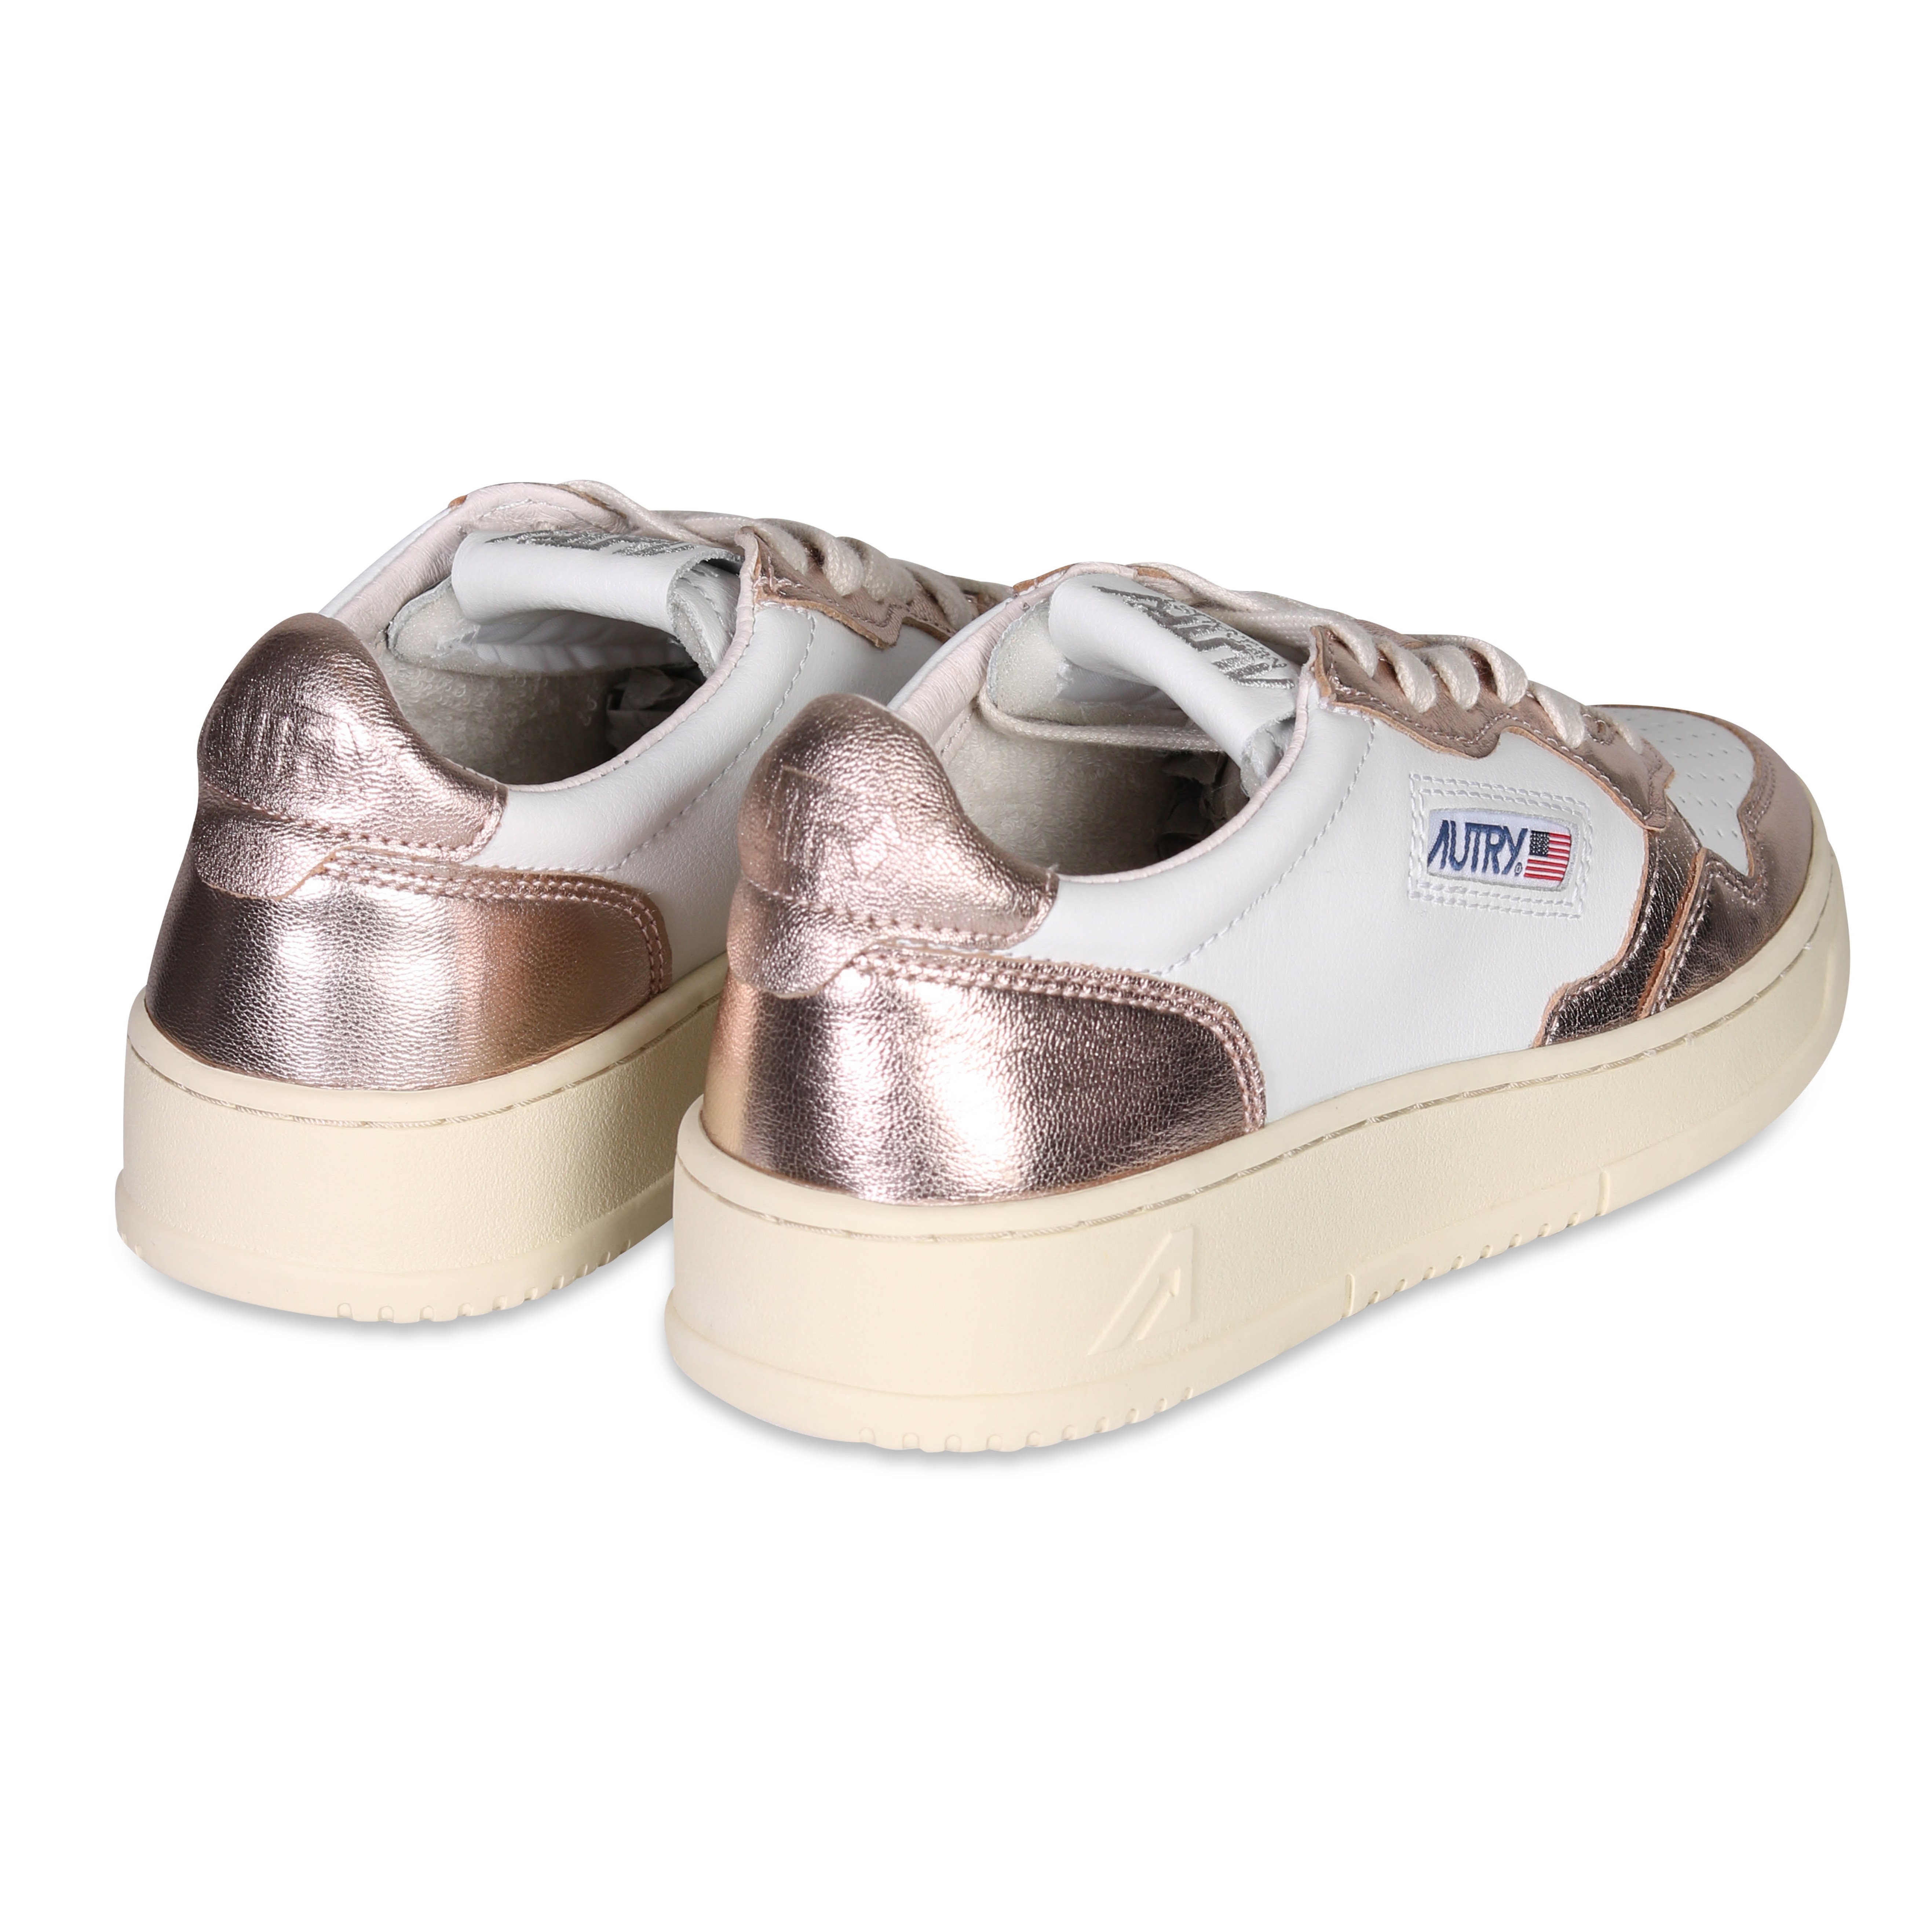 Autry Action Shoes Low Sneaker White/Copper